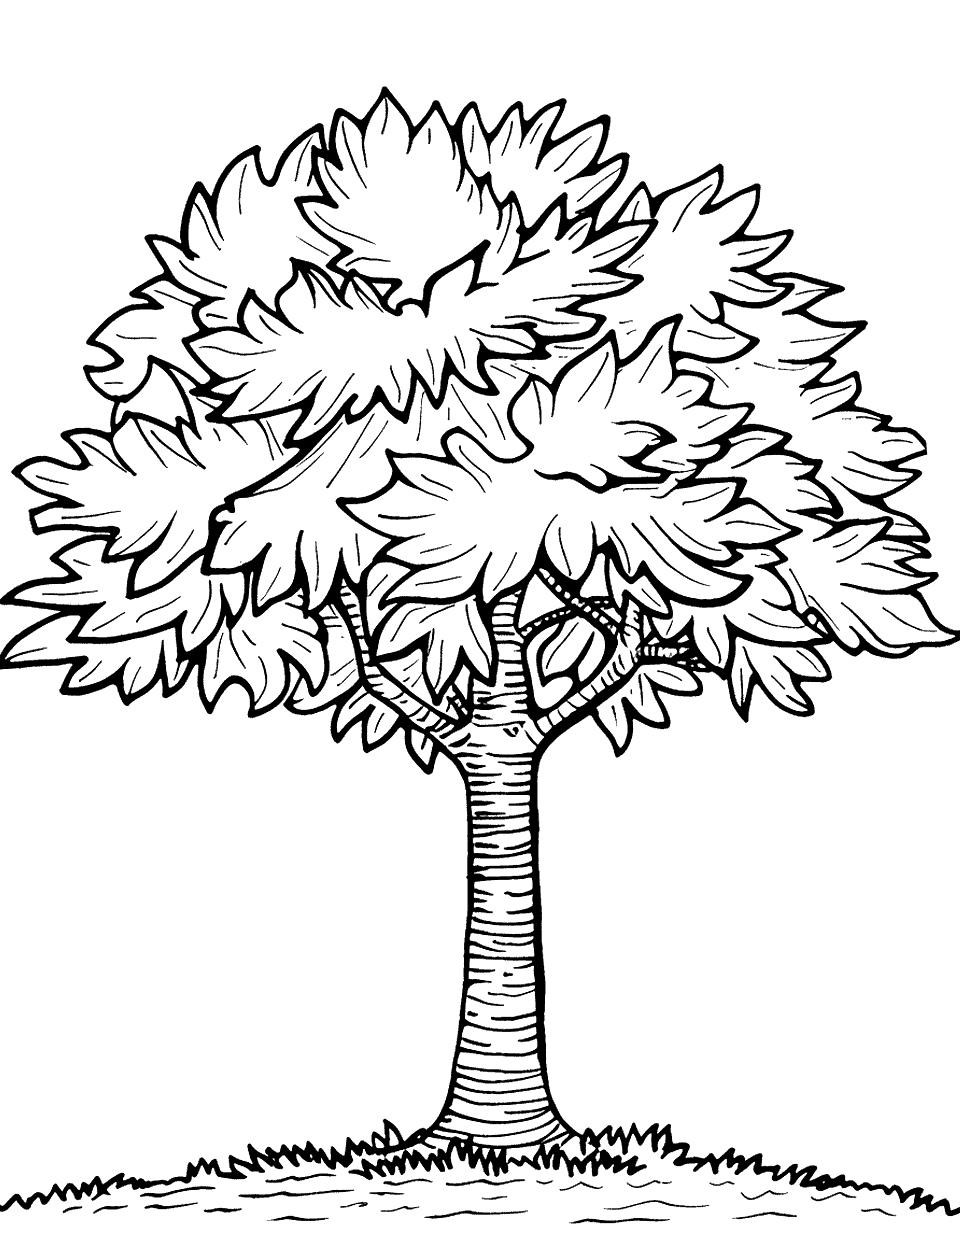 Maple Tree in Fall Coloring Page - A maple tree with vibrant leaves.